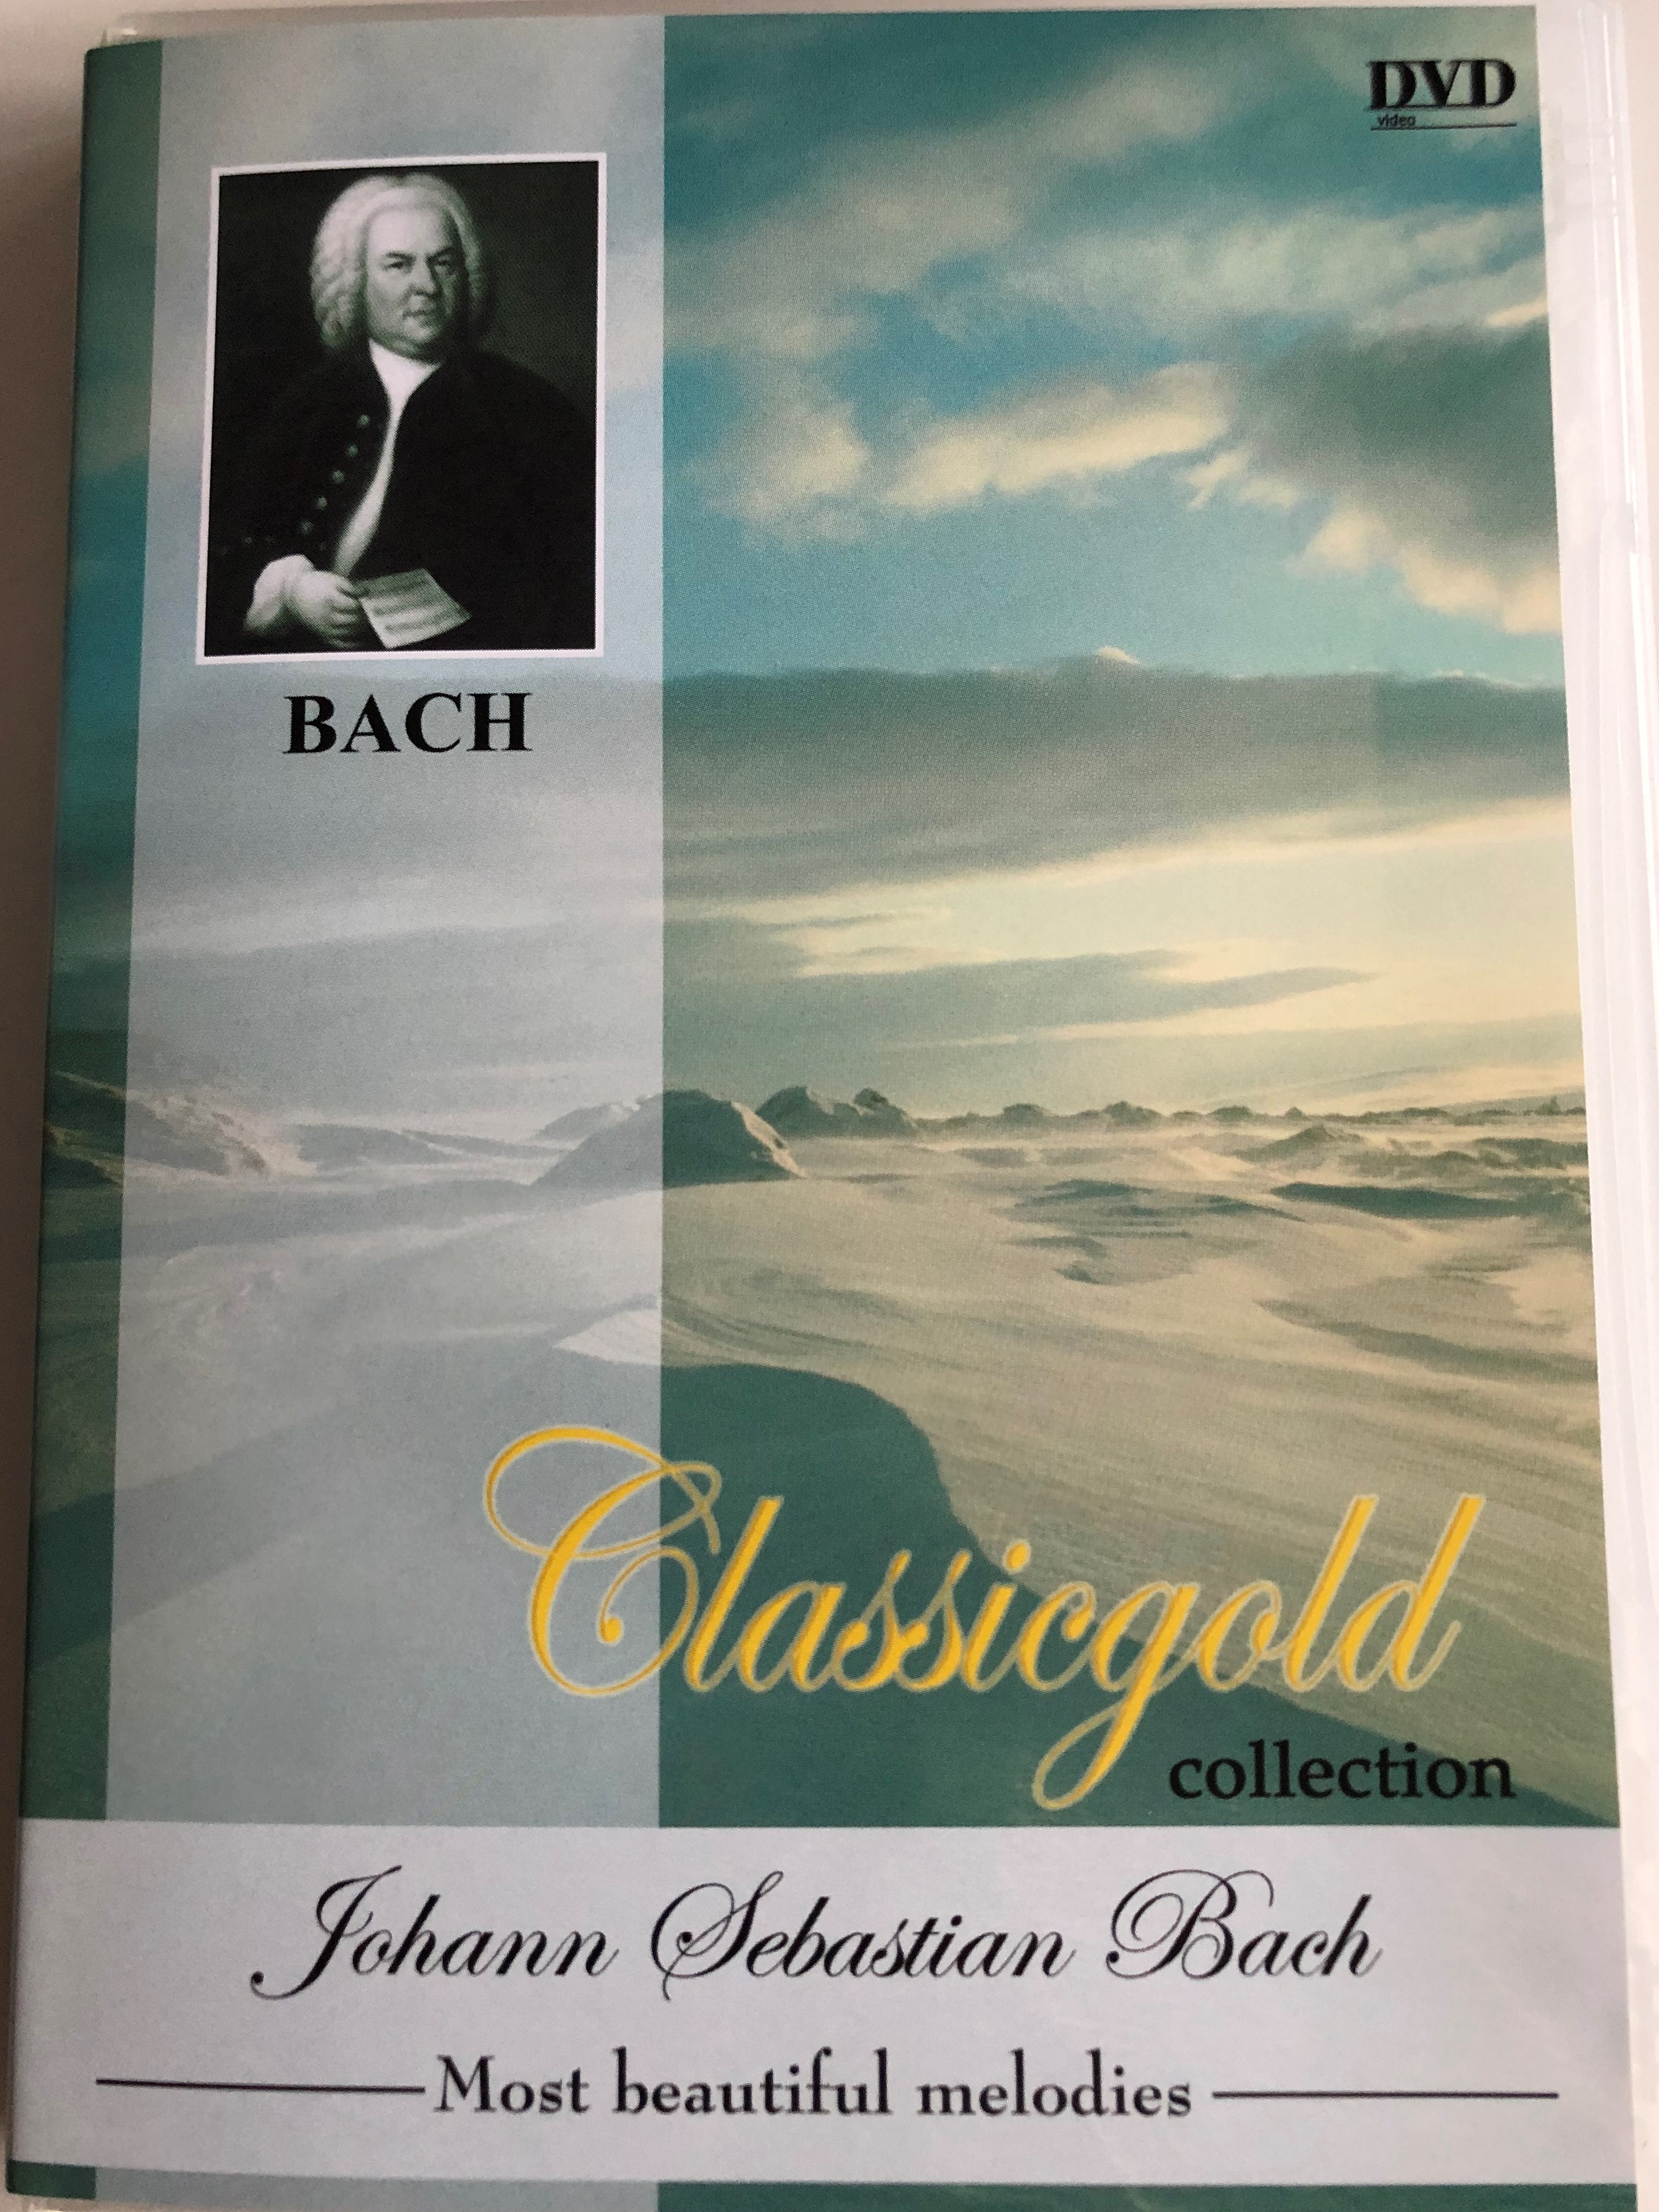 Johann Sebastian Bach - Most beautiful melodies DVD 2003 Classicgold  collection / Performed by Wolfgang van Eyck / Art Media - Bible in My  Language